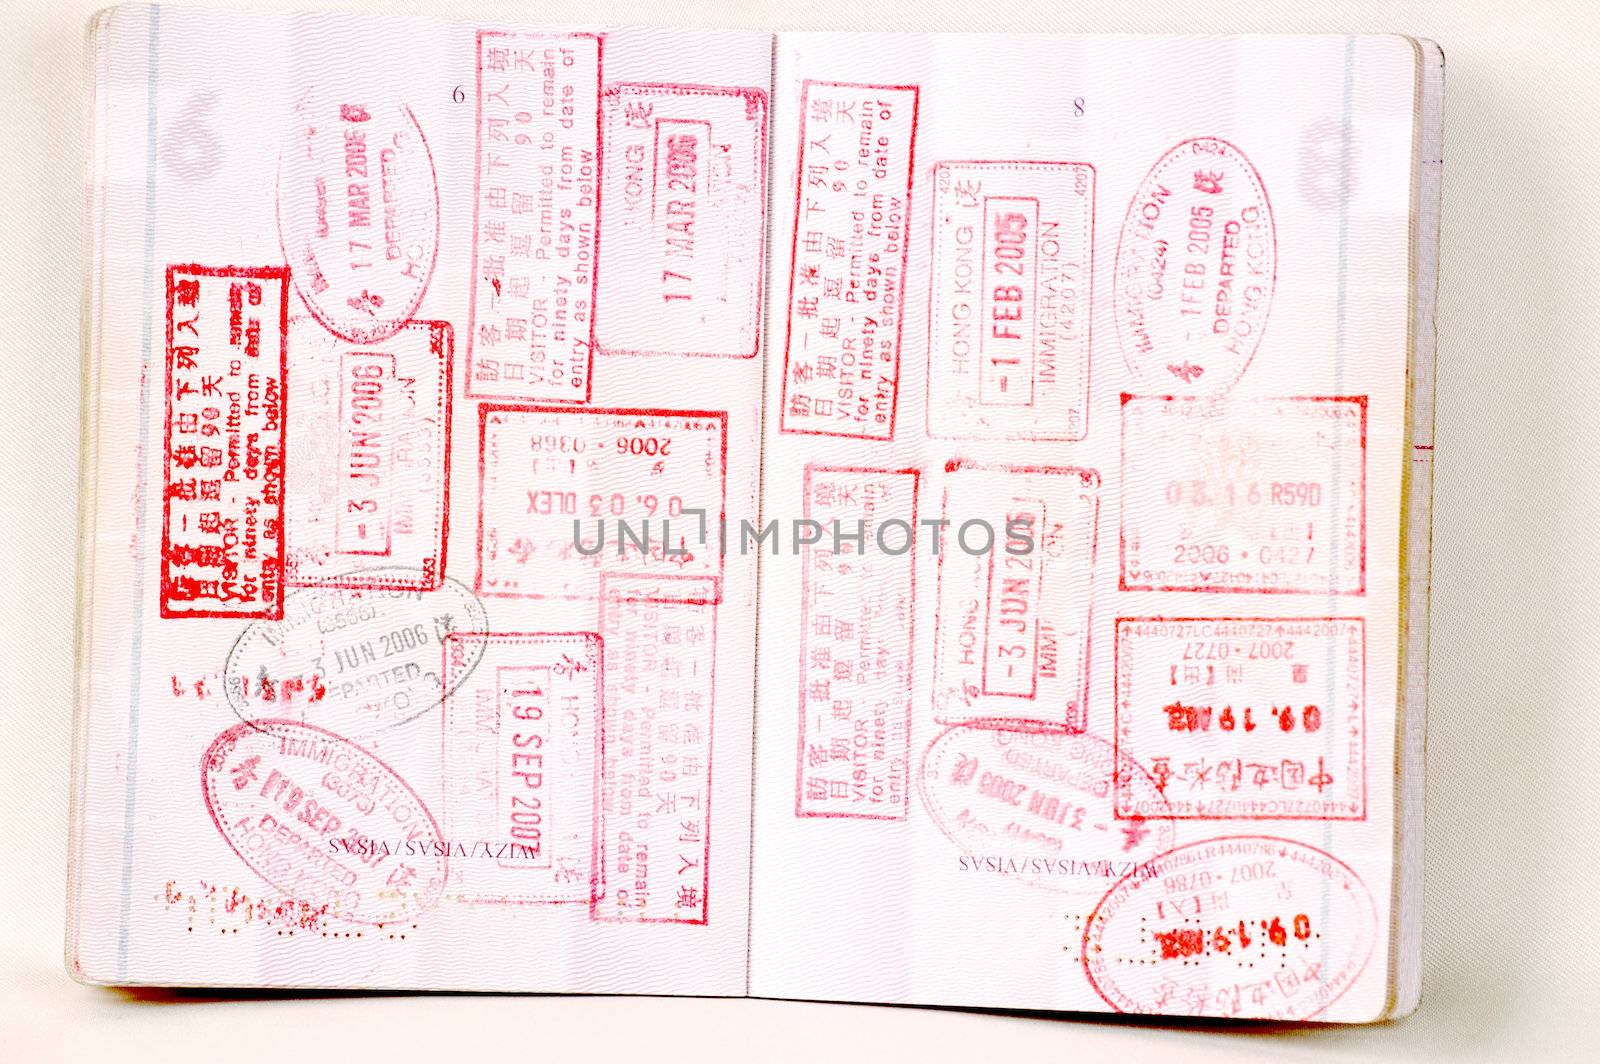 European passport full of stamps from China and Hongkong borders.